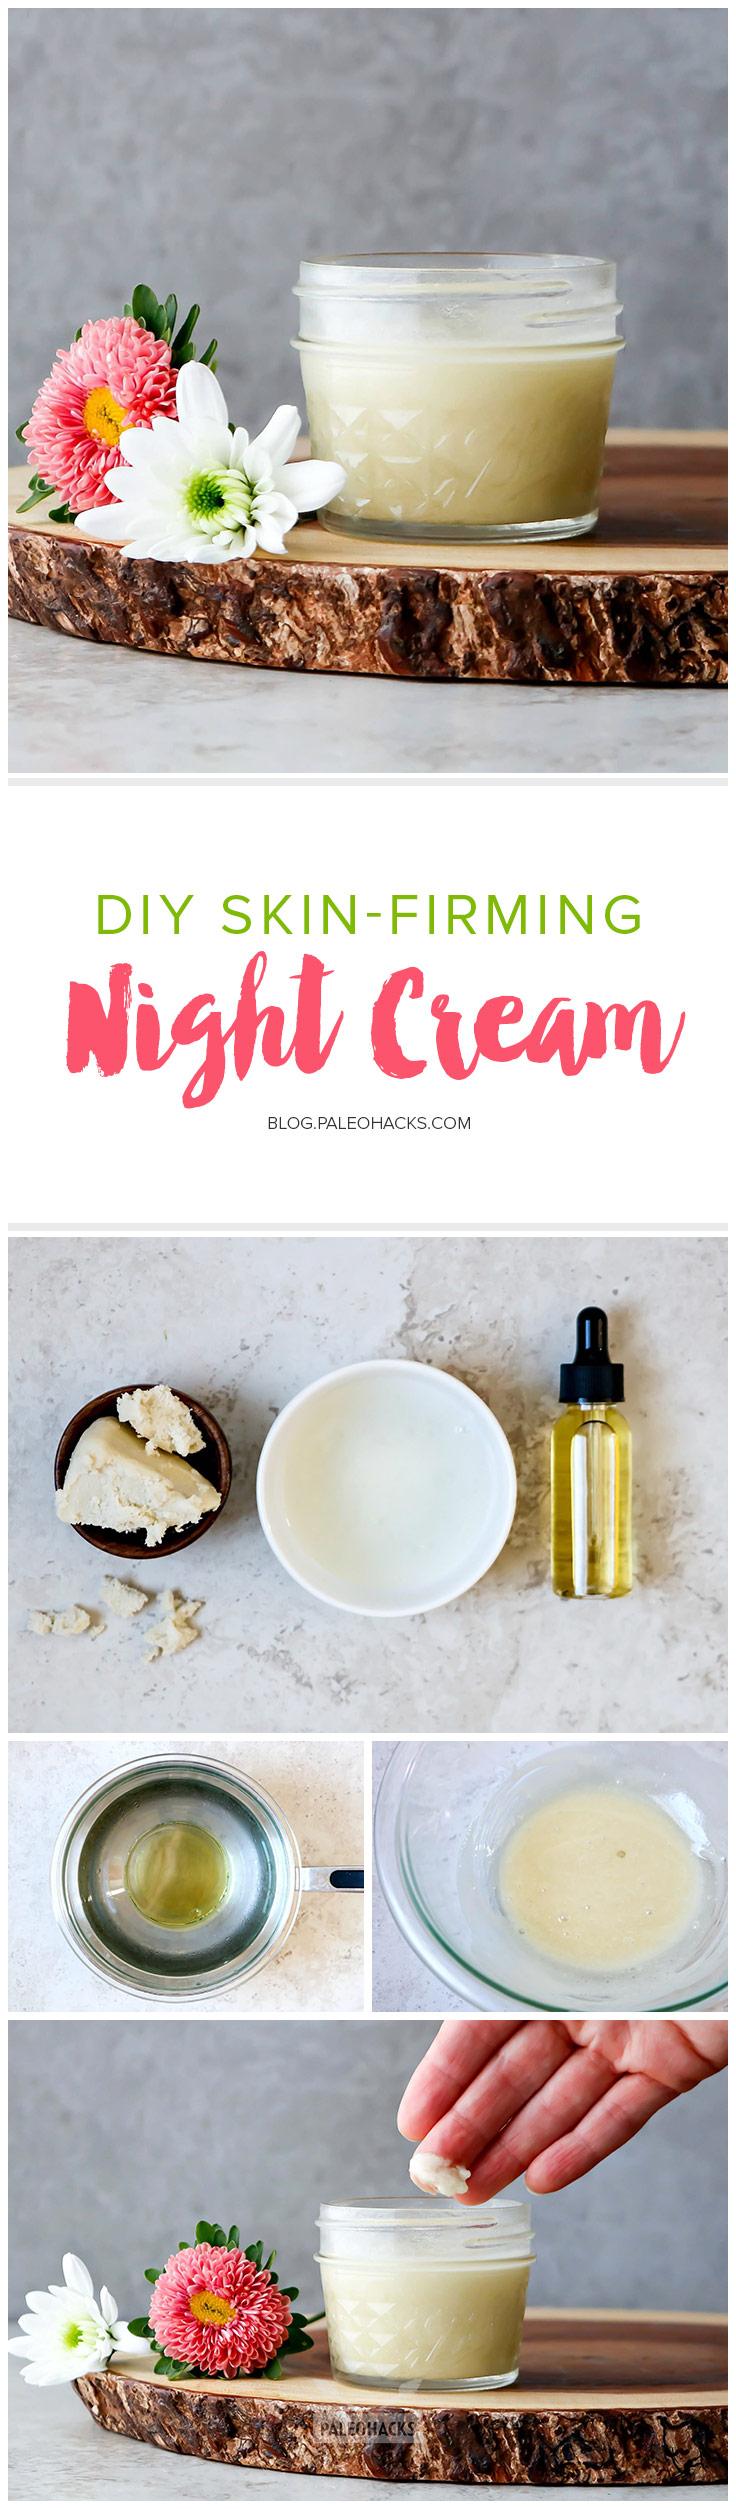 This 3-ingredient skin-firming night cream will plump, moisturize, and help restore your skin's elasticity.